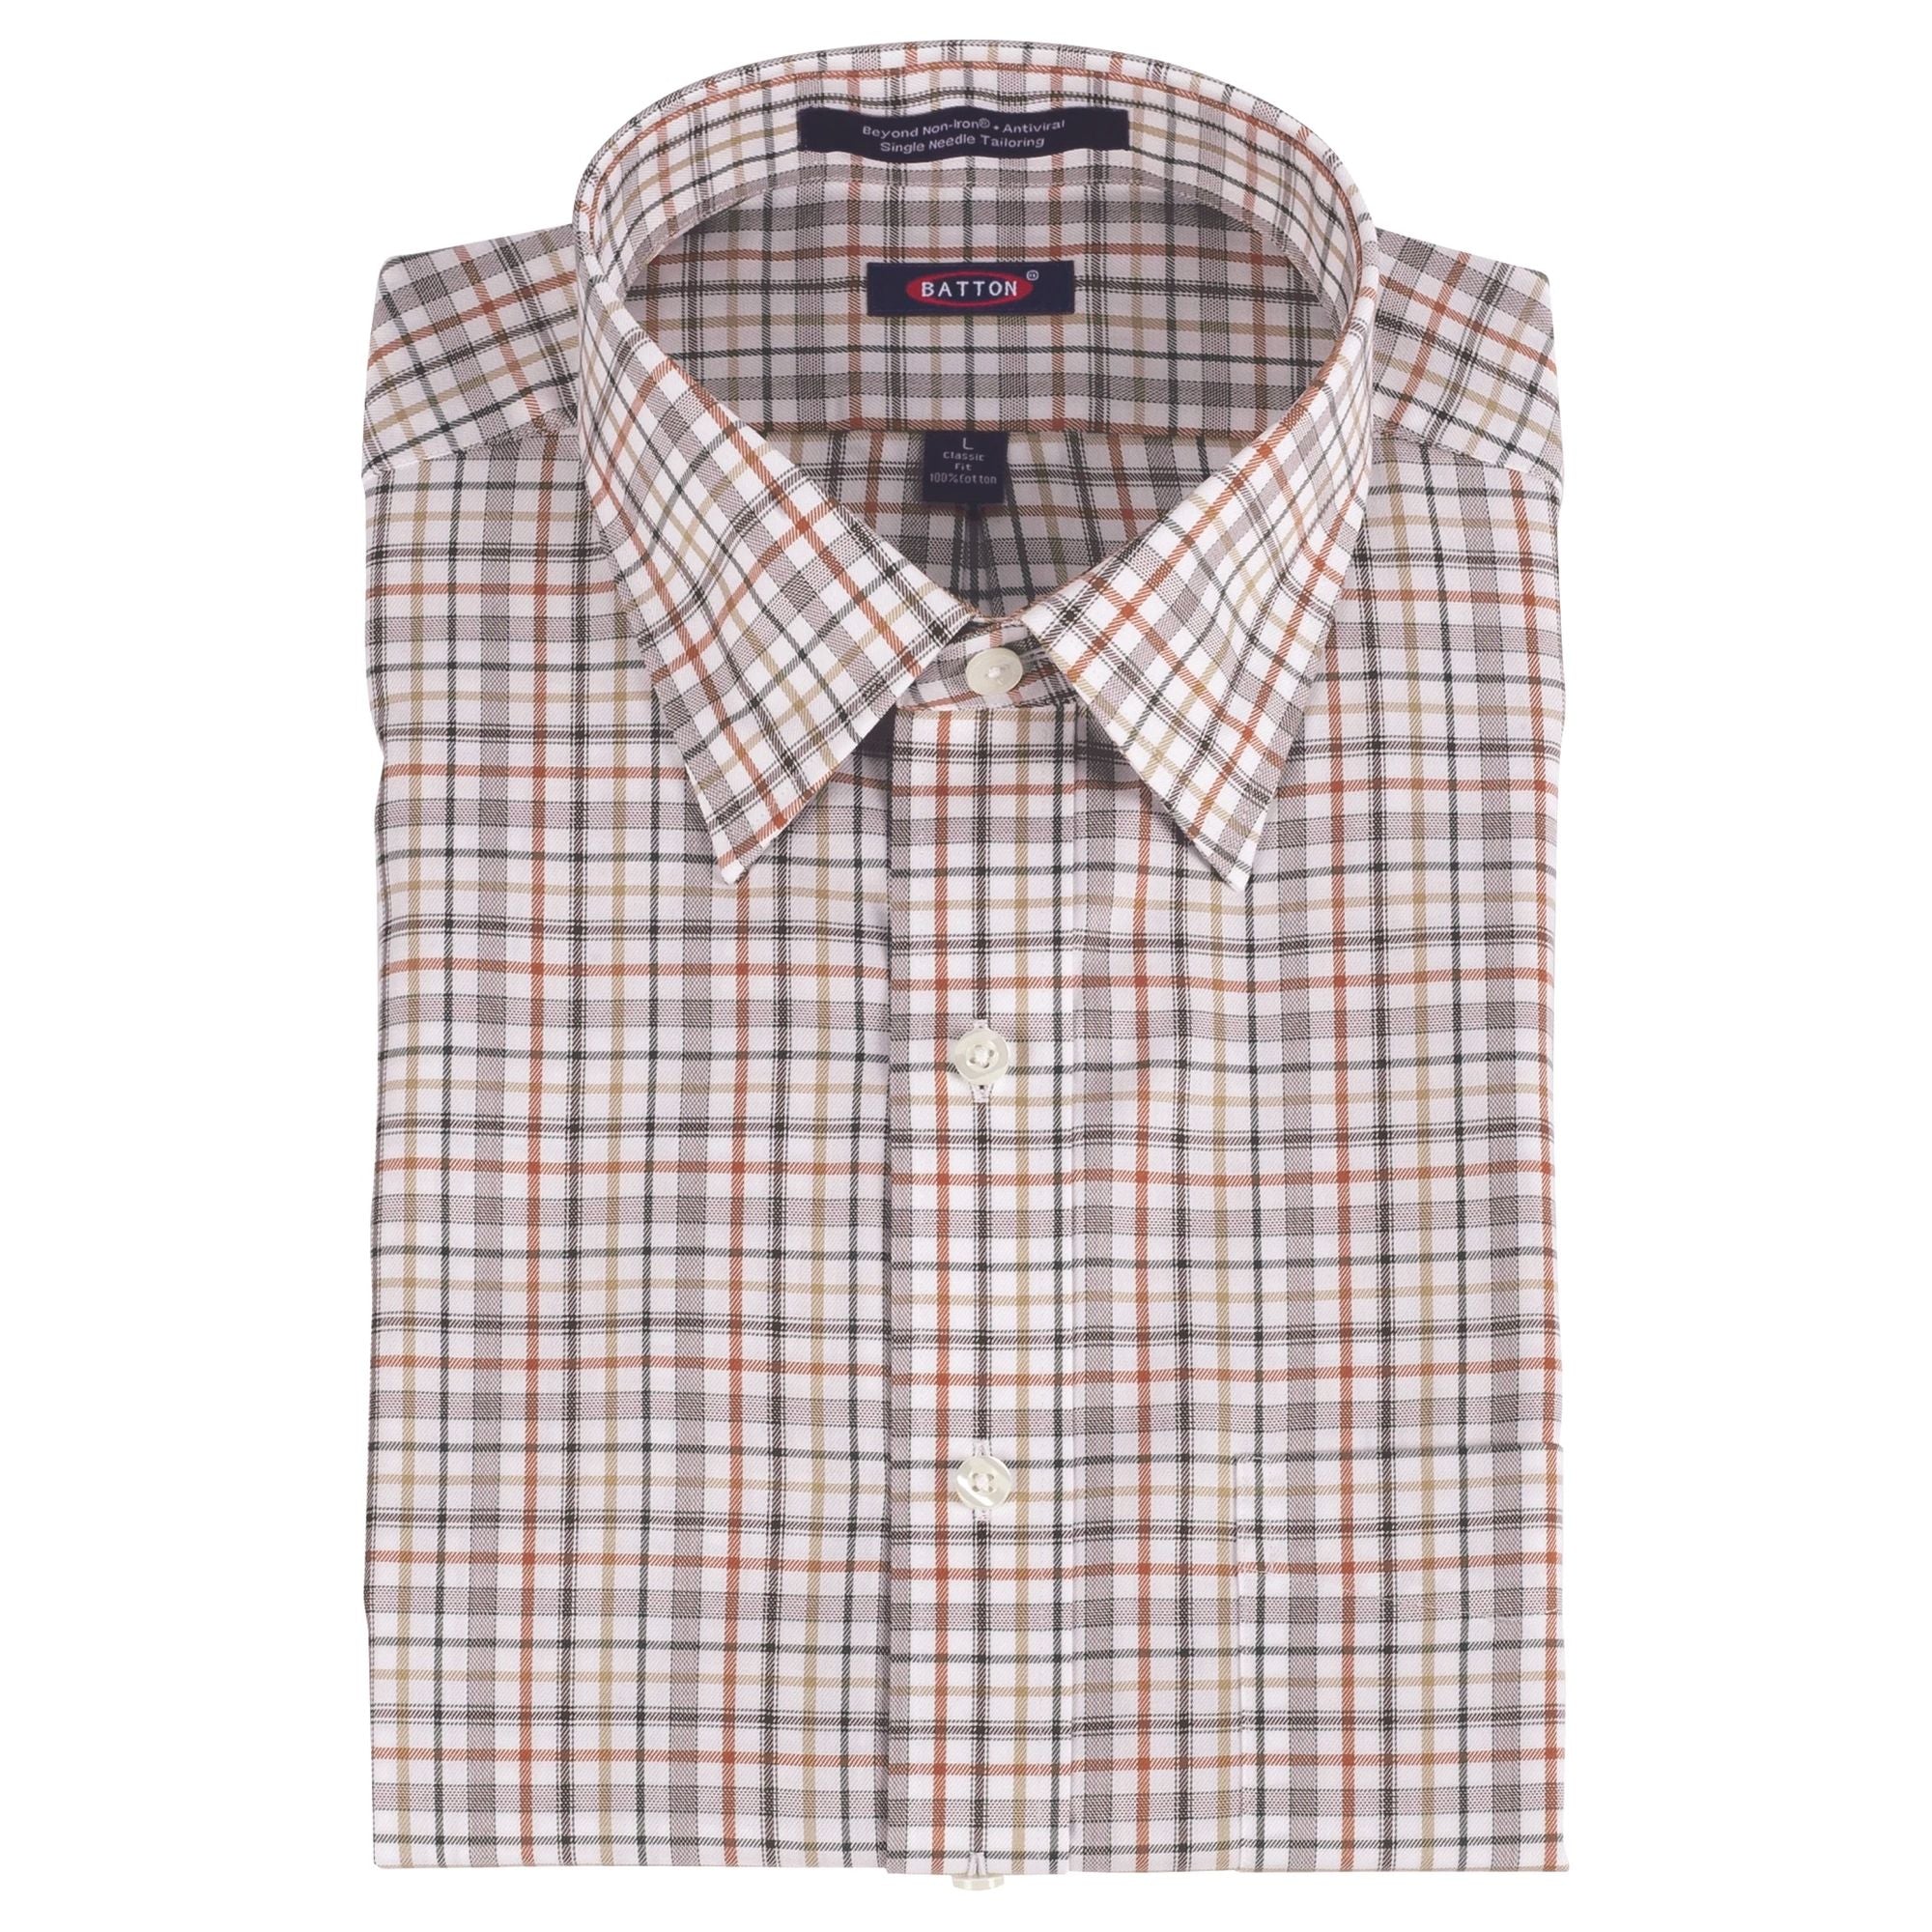 'Walter' Brown, Rust, and Tan Plaid Long Sleeve Beyond Non-Iron® Cotton Twill Sport Shirt by Batton